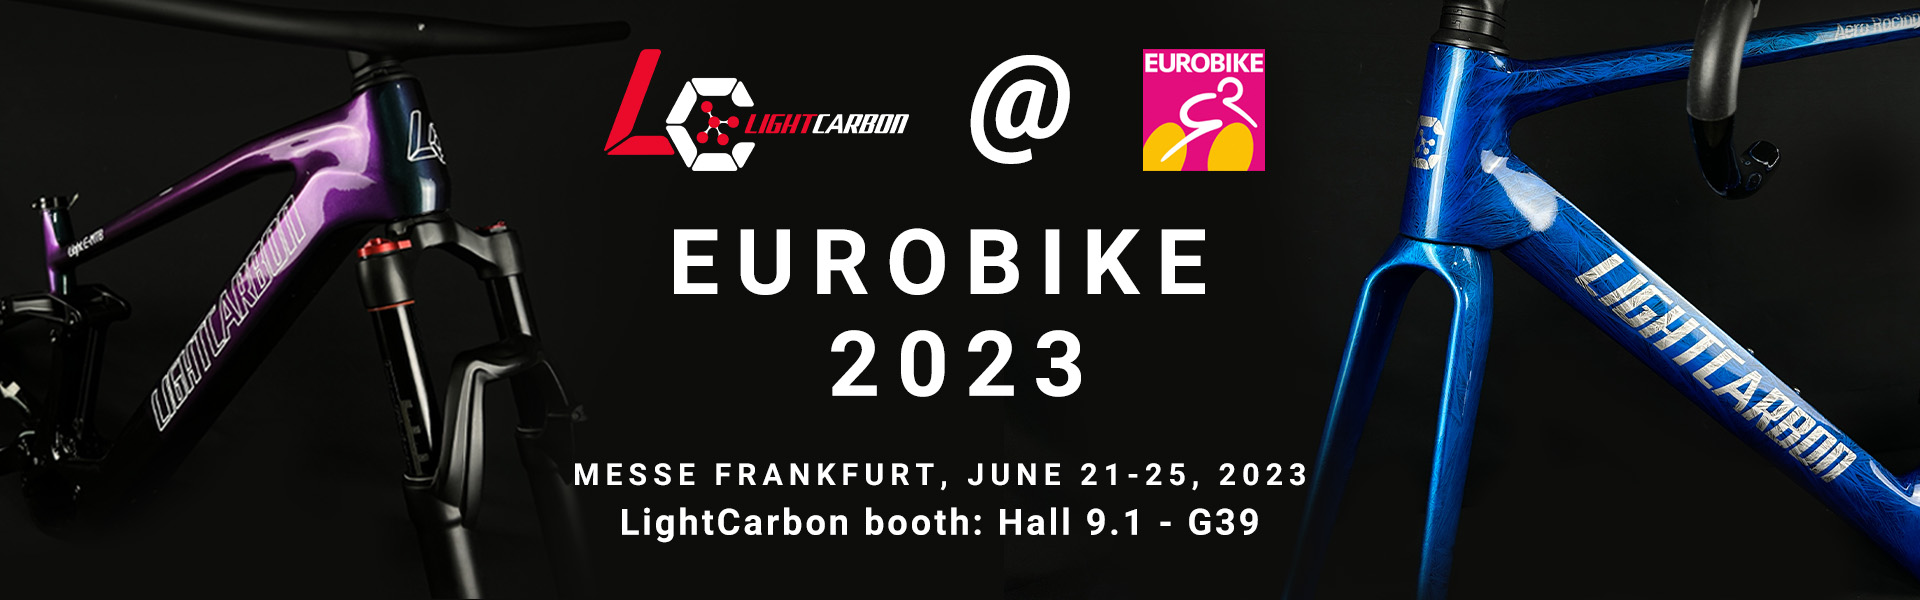 LightCarbon 2023 Eurobike booth